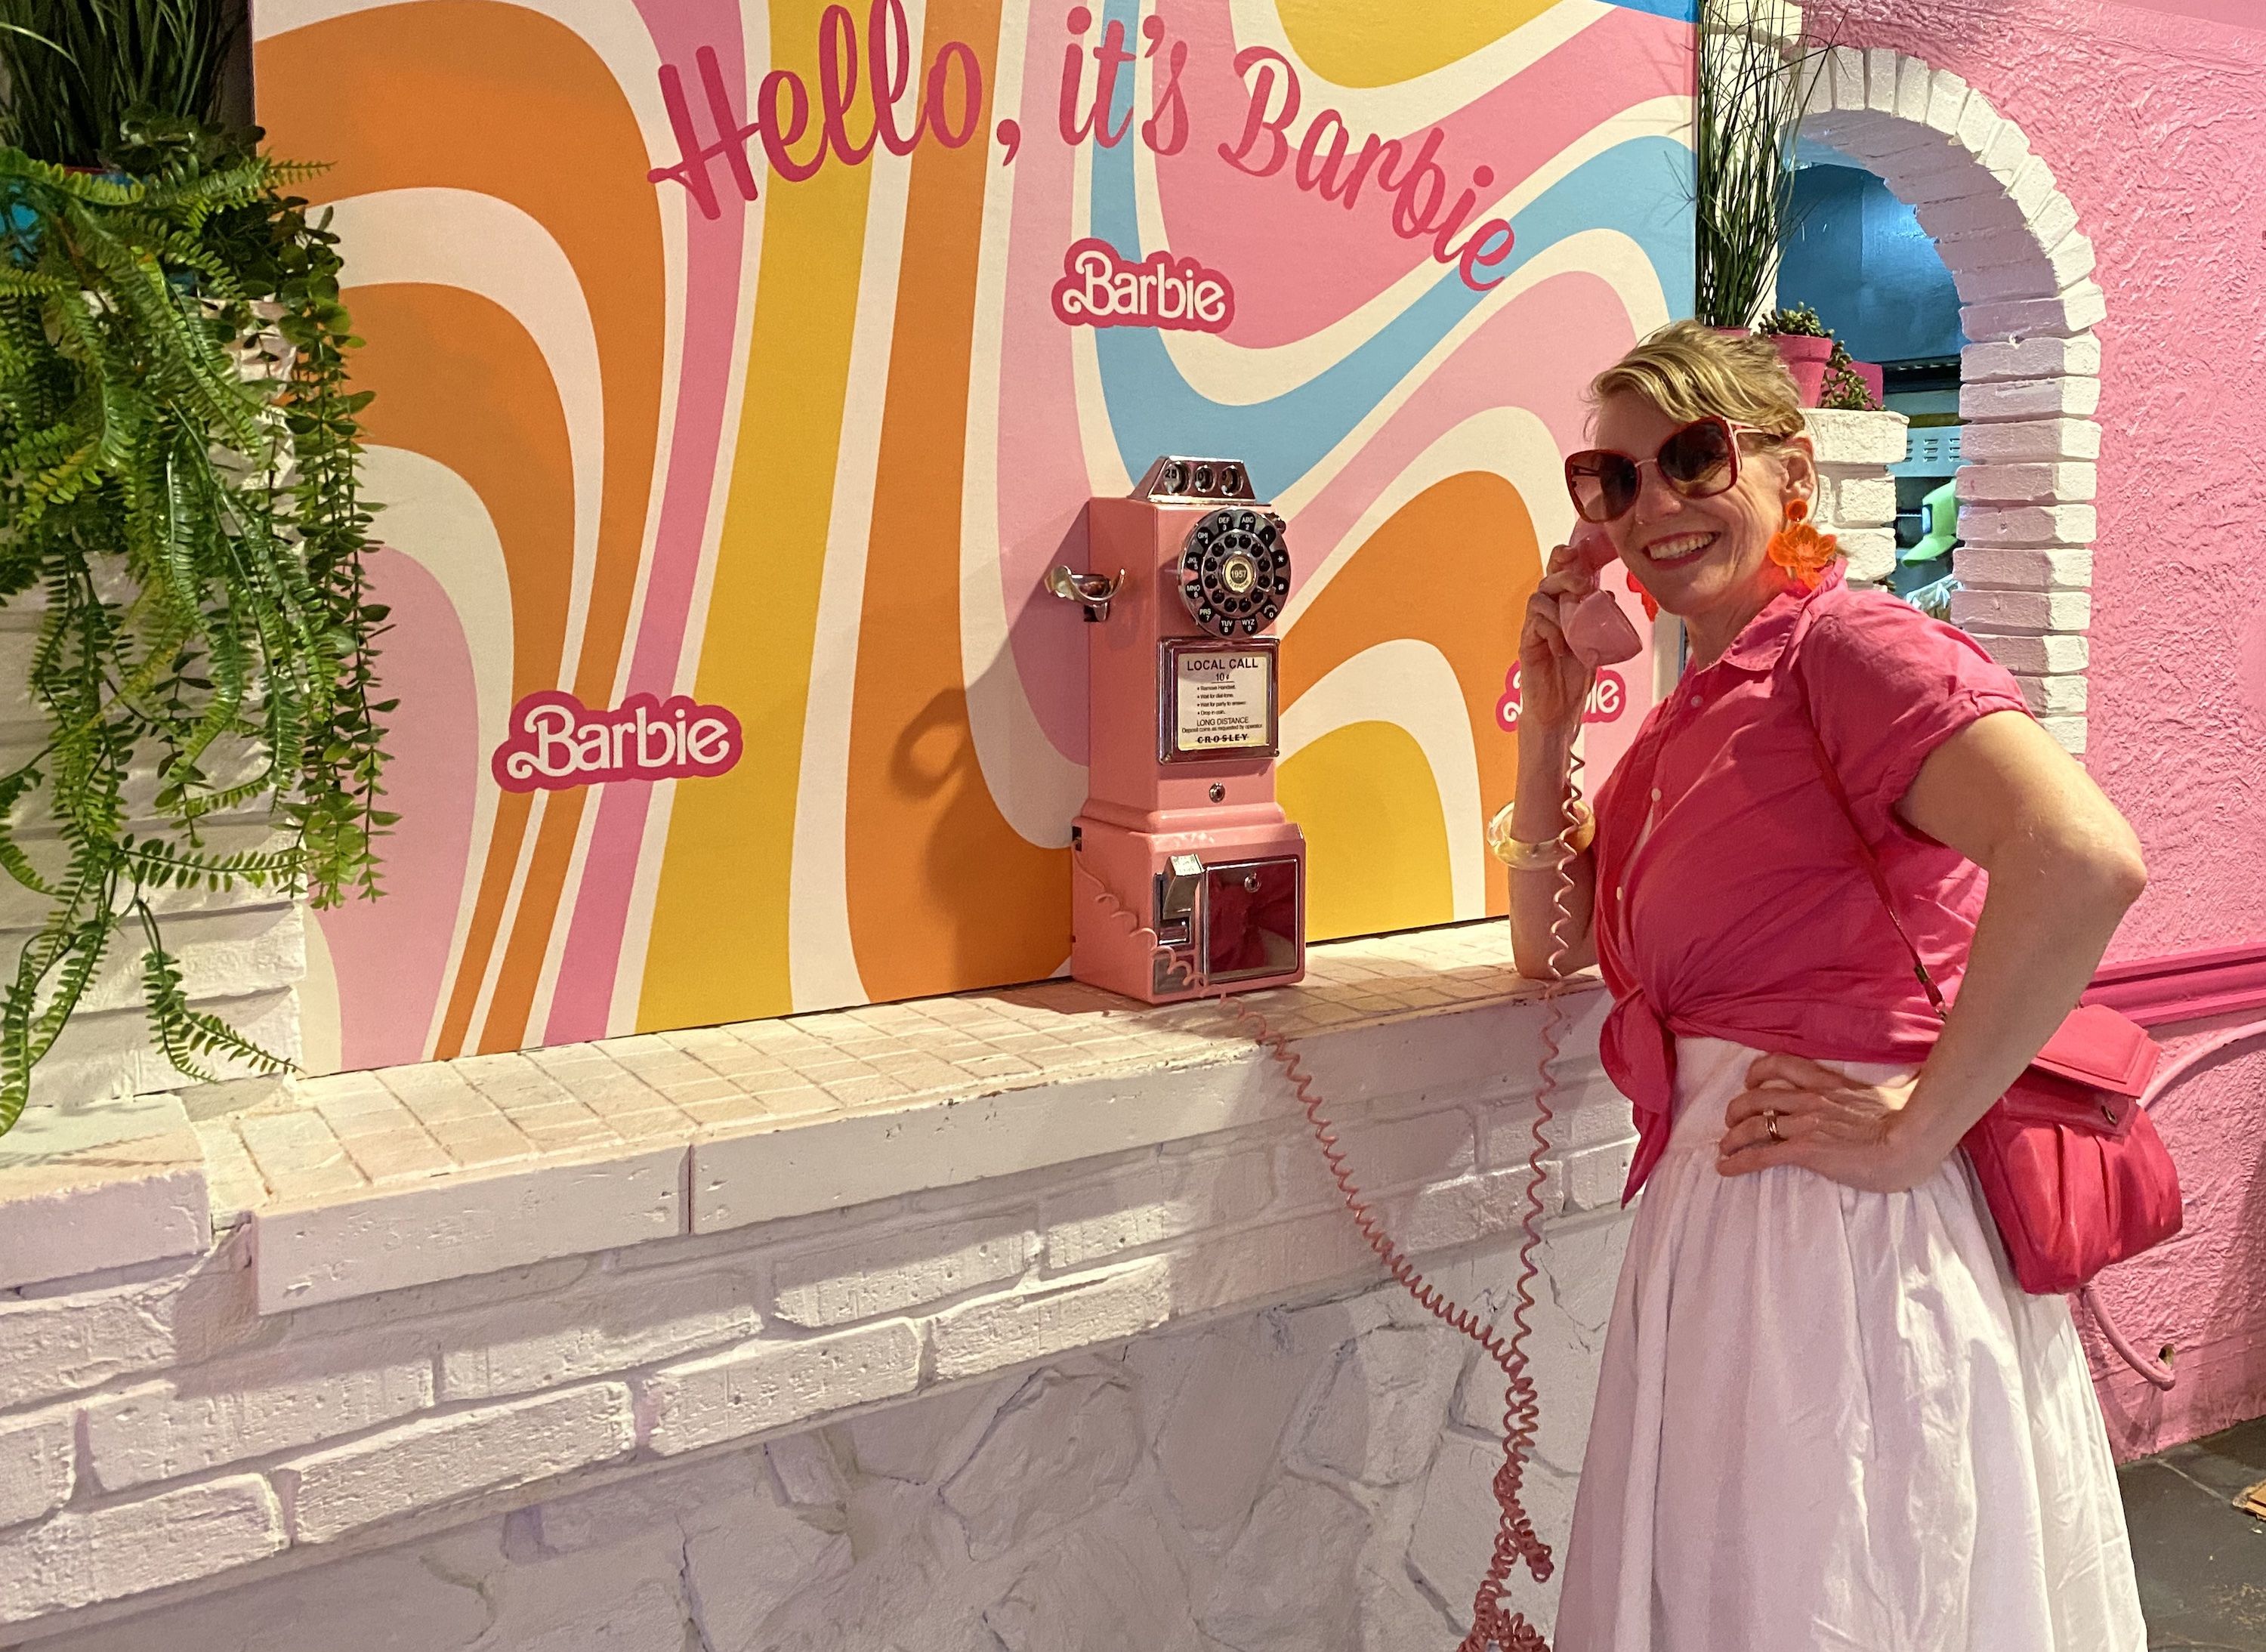 Multi color background that reads "Hello, it's Barbie" with a pink rotary phone which is held by woman in pink shirt and pink sunglasses.